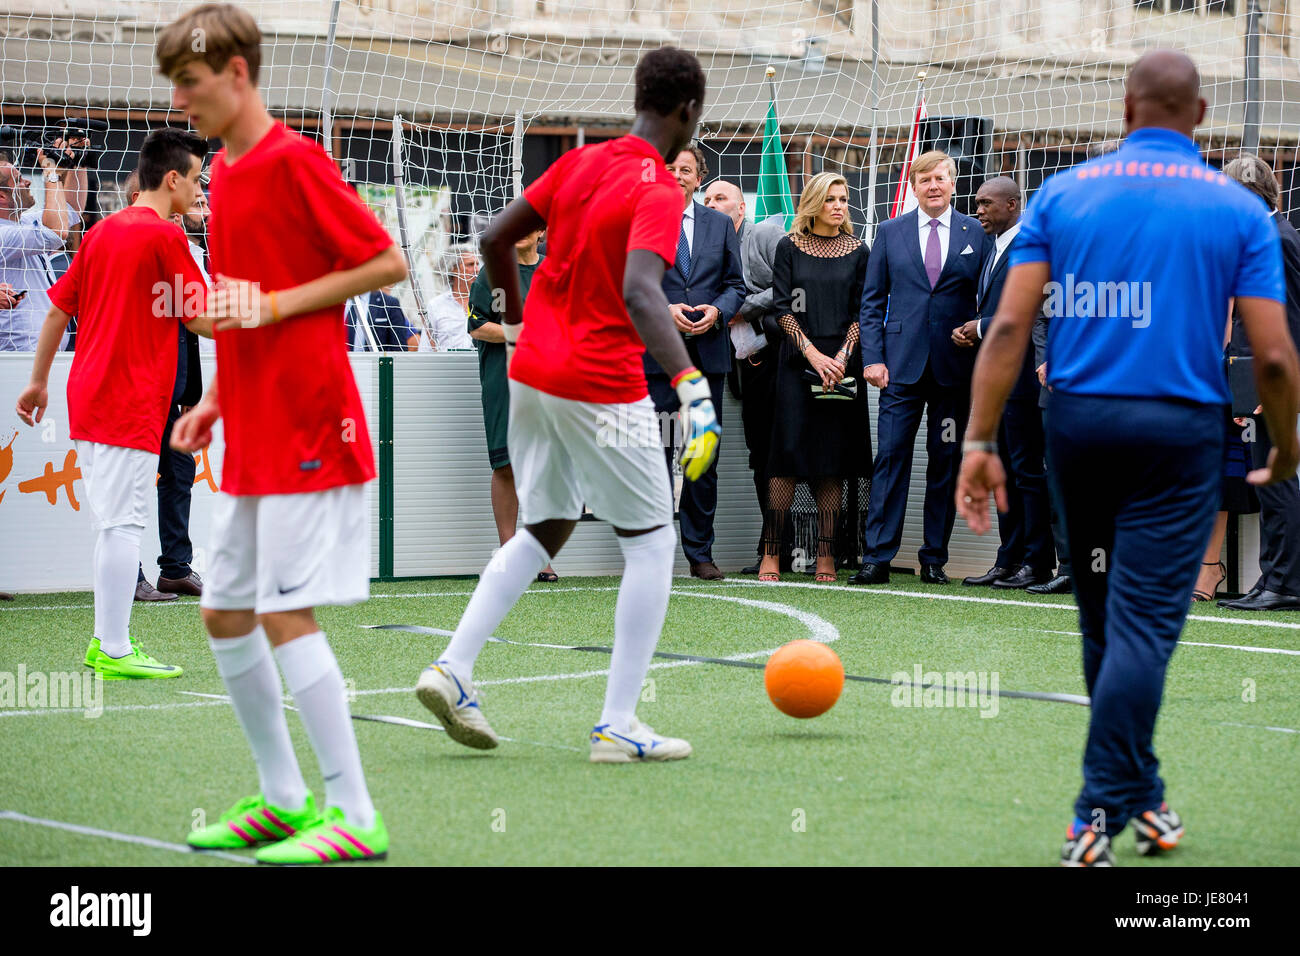 Milan, Italy. 22nd June, 2017. King Willem-Alexander and Queen Maxima of The Netherlands attend a soccer clinic with dutch former players Clarence Seedor, Aaron Winter, Pierre van Hooijdonk and Edgar Davids at the Piazette Reale in Milan, Italy, 22 June 2017. The King and Queen of the Netherlands are in Italy for an 4 day state visit. Photo: Patrick van Katwijk Netherlands OUT/Point de Vue OUT - NO WIRE SERVICE - Photo: Patrick van Katwijk/Dutch Photo Press/dpa/Alamy Live News Stock Photo